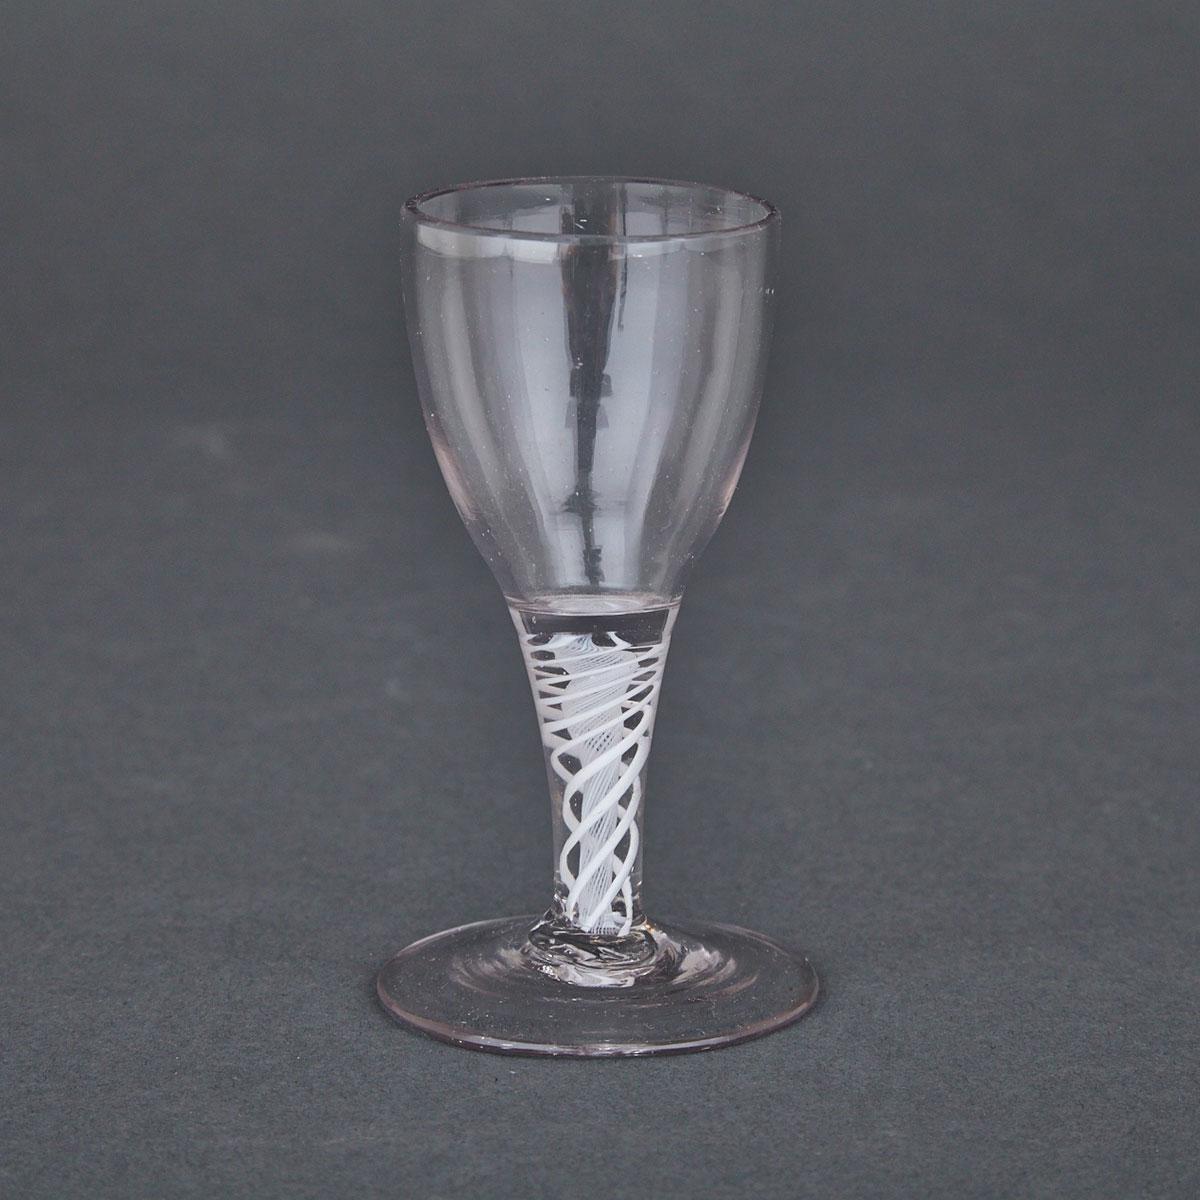 Continental Opaque Twist Stemmed Cordial Glass, late 18th century